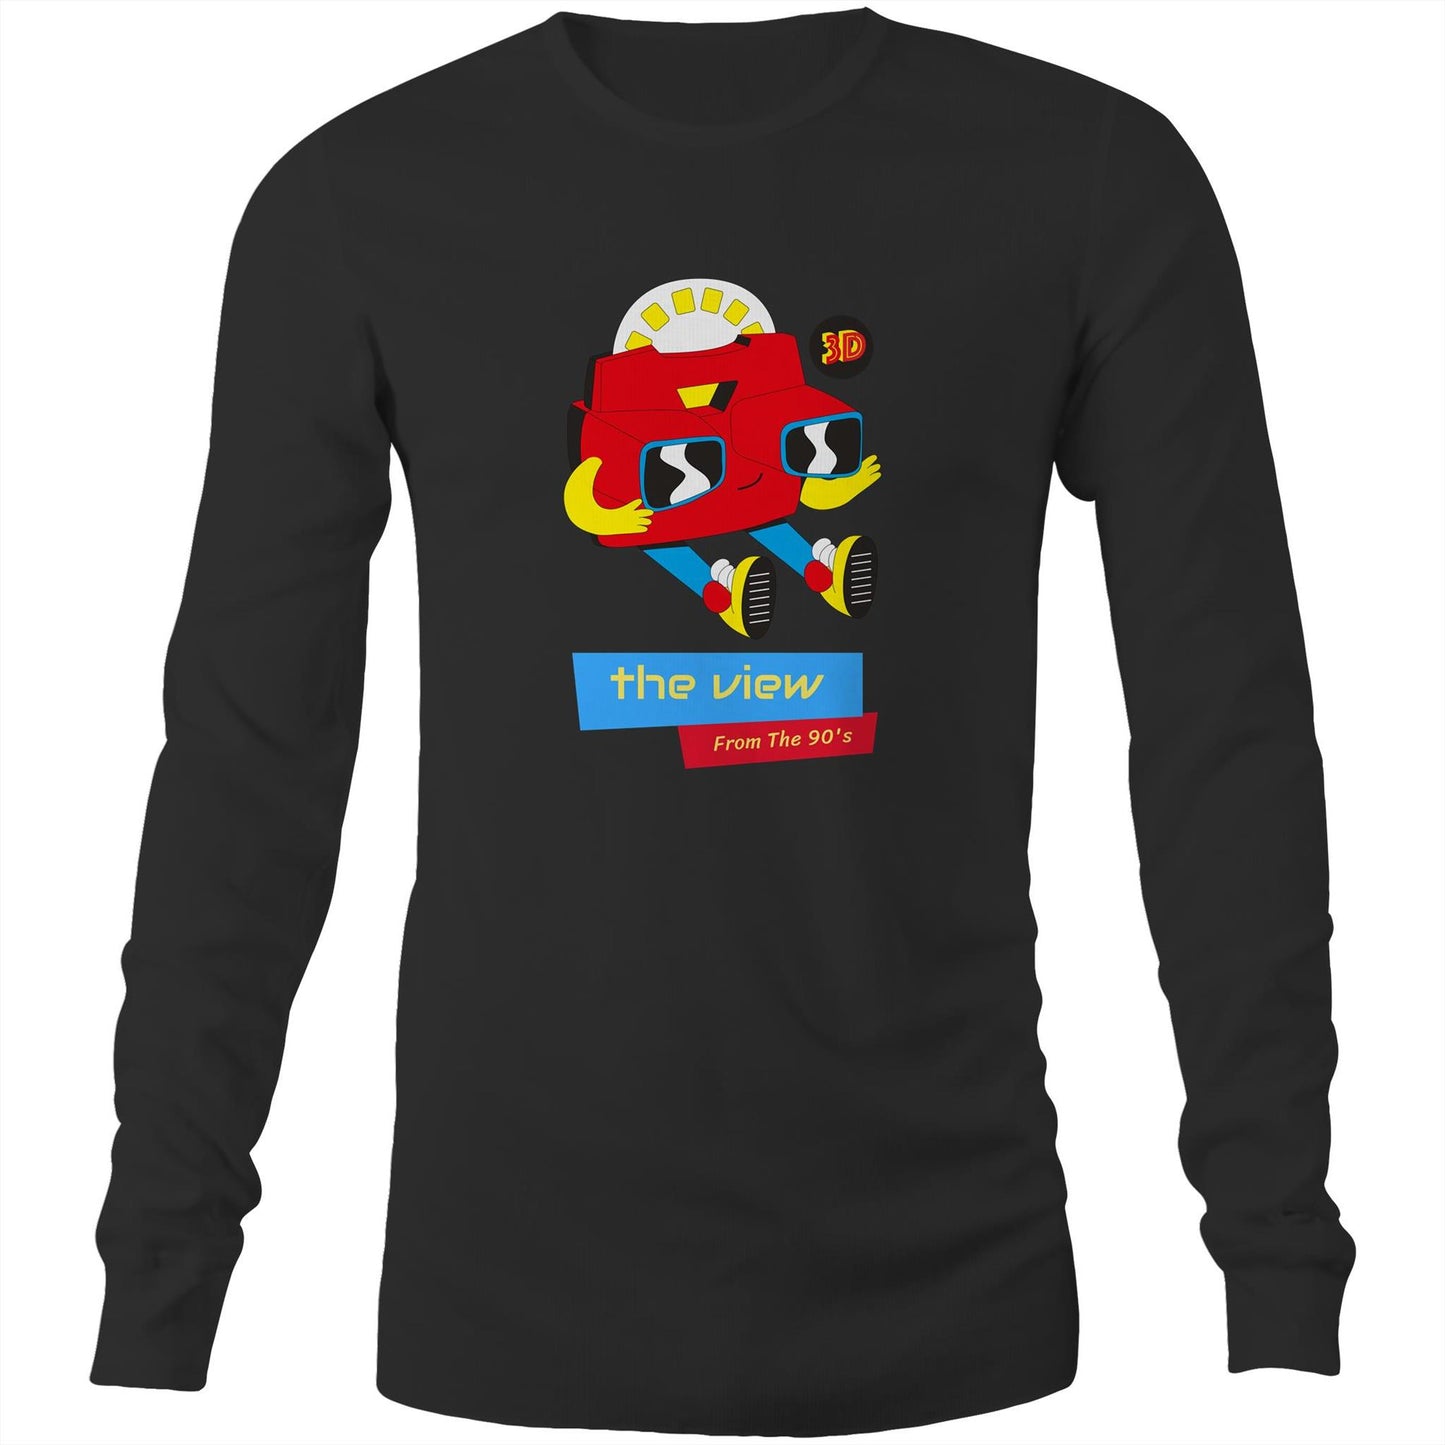 The View From The 90's - Long Sleeve T-Shirt Black Unisex Long Sleeve T-shirt Retro